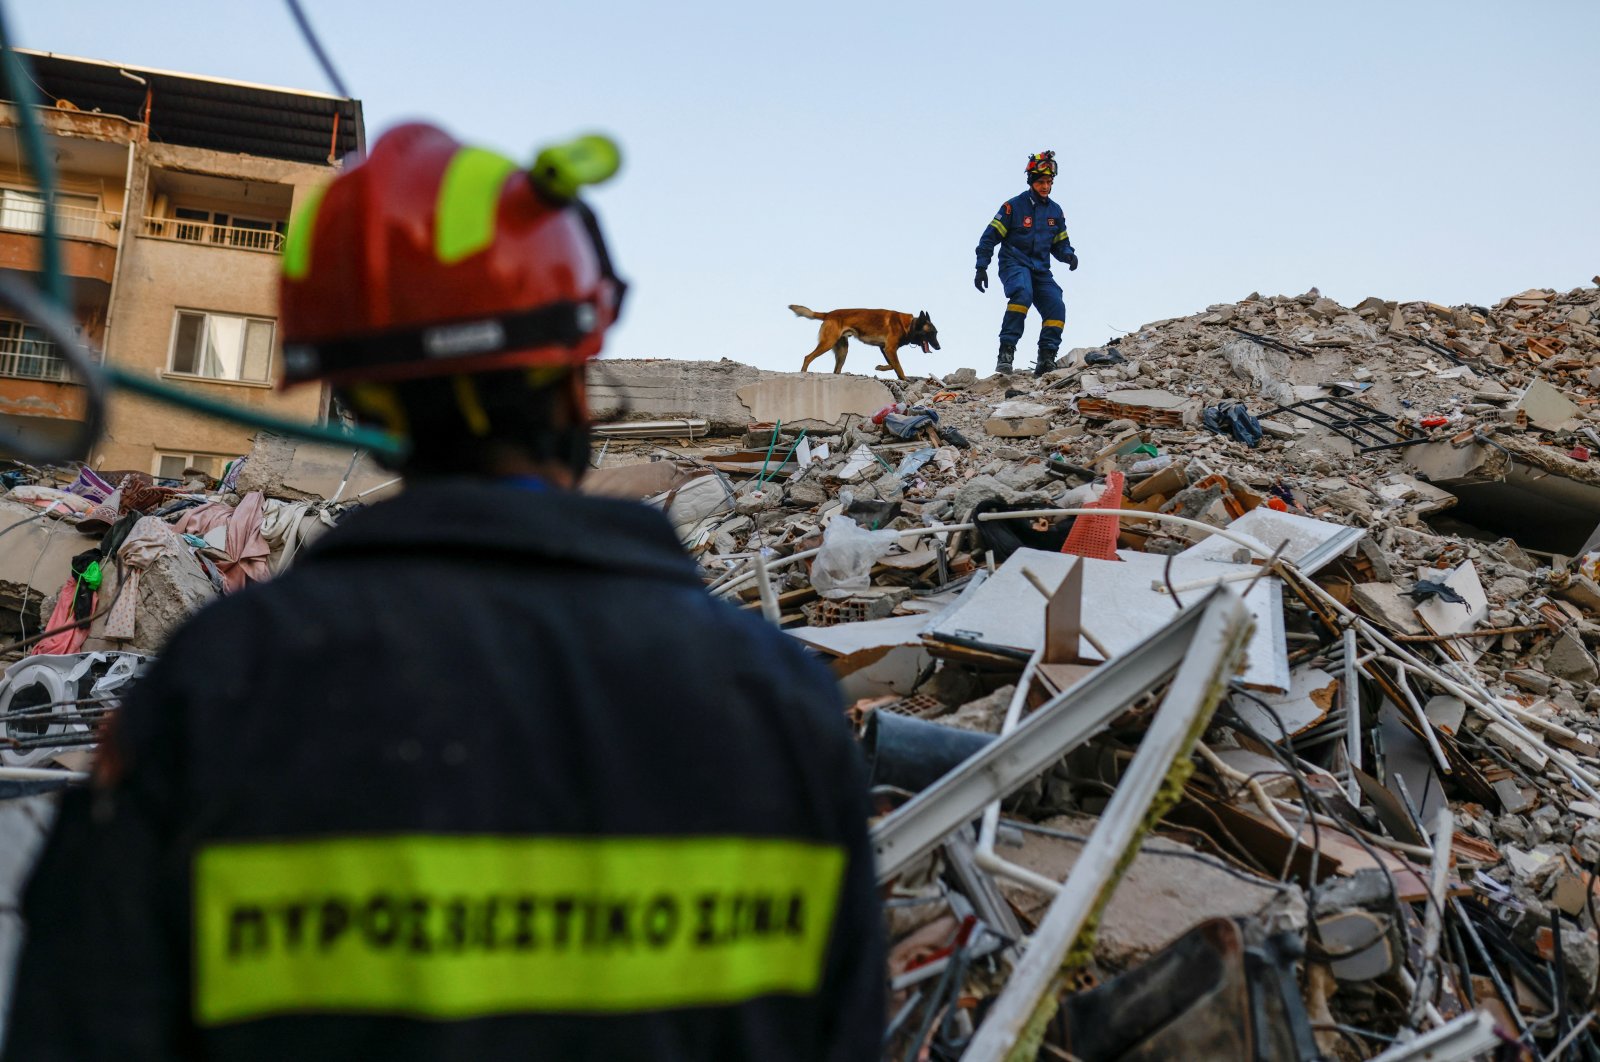 Members of a Greek rescue team work on the site of a collapsed building, as the search for survivors continues, in the aftermath of a deadly earthquake, in Hatay, Türkiye, Feb. 11, 2023. (Reuters Photo)